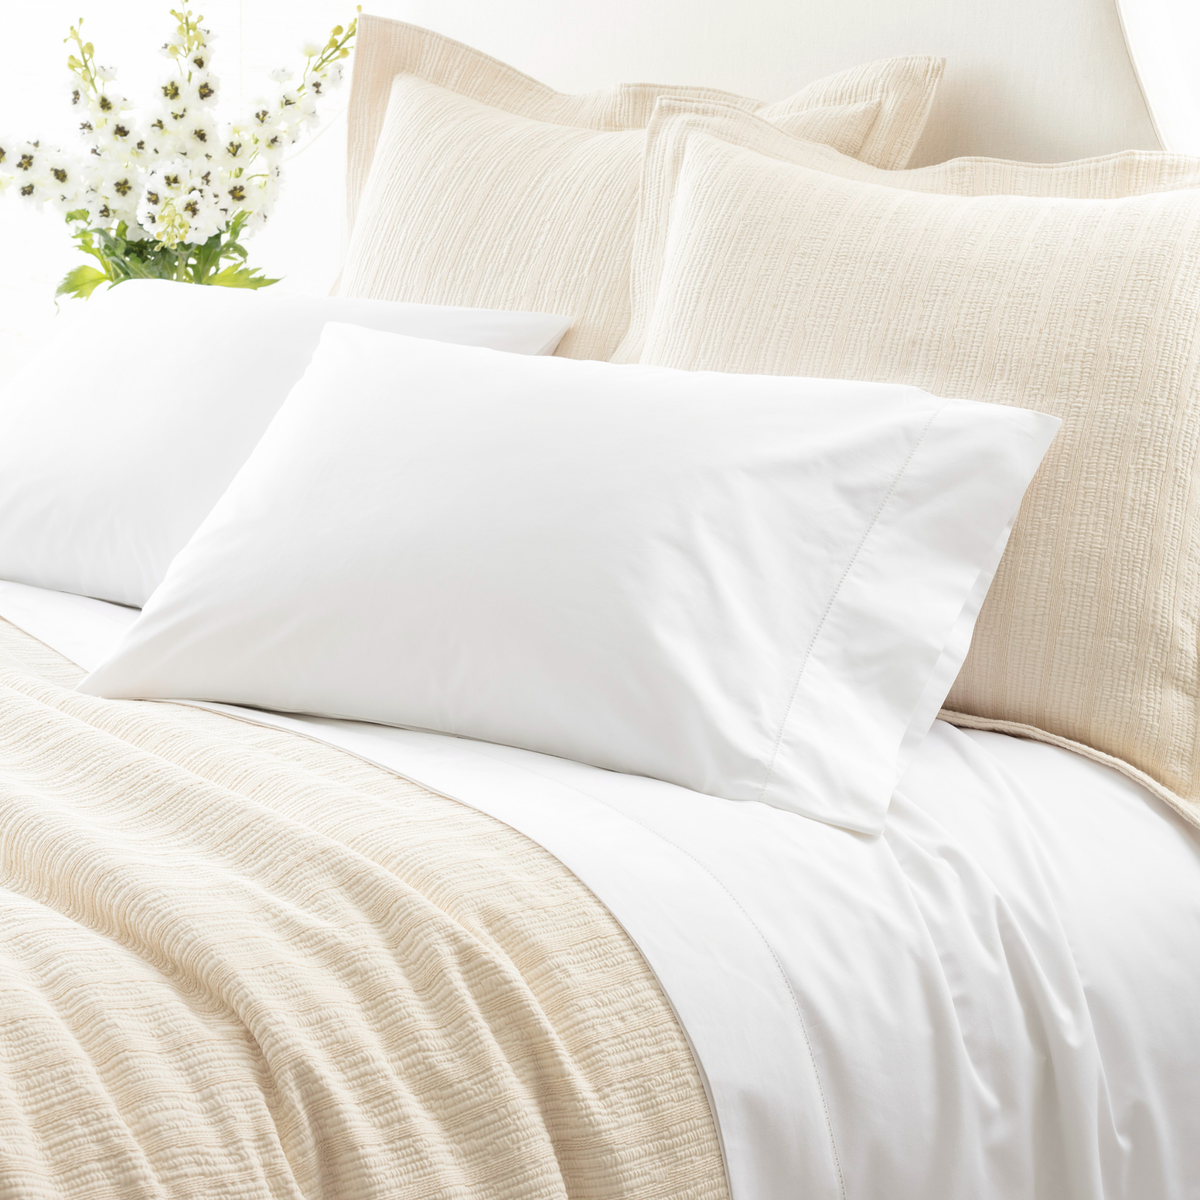  Pillowcases and Flat Sheet of White Pine Cone Hill Classic Hemstitch Bedding with Coordinate